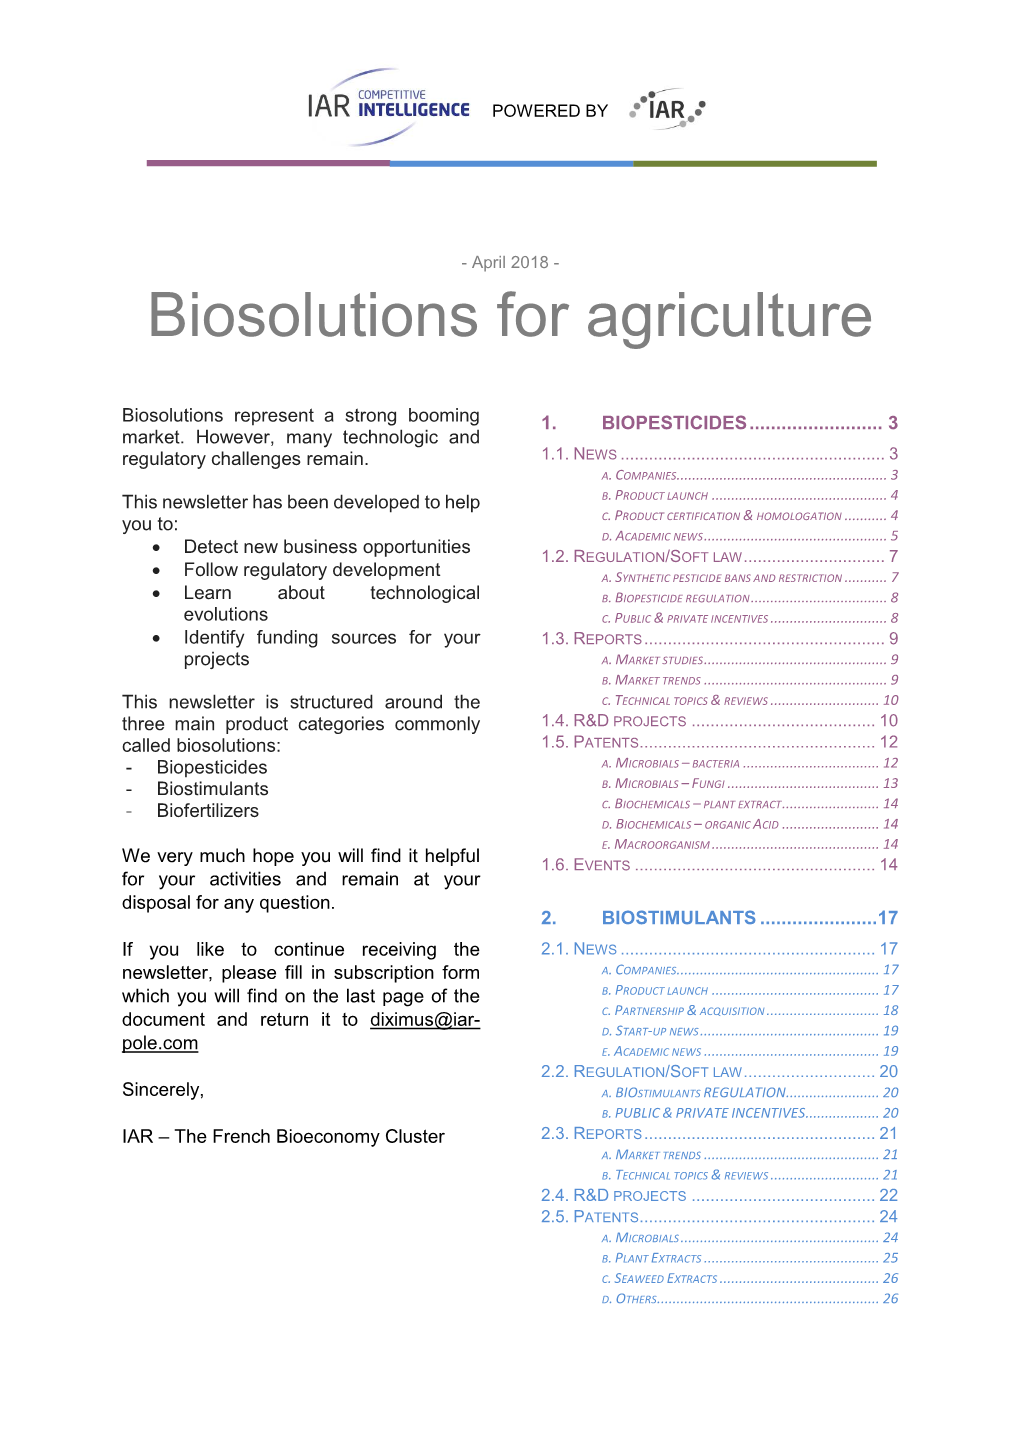 Biosolutions for Agriculture